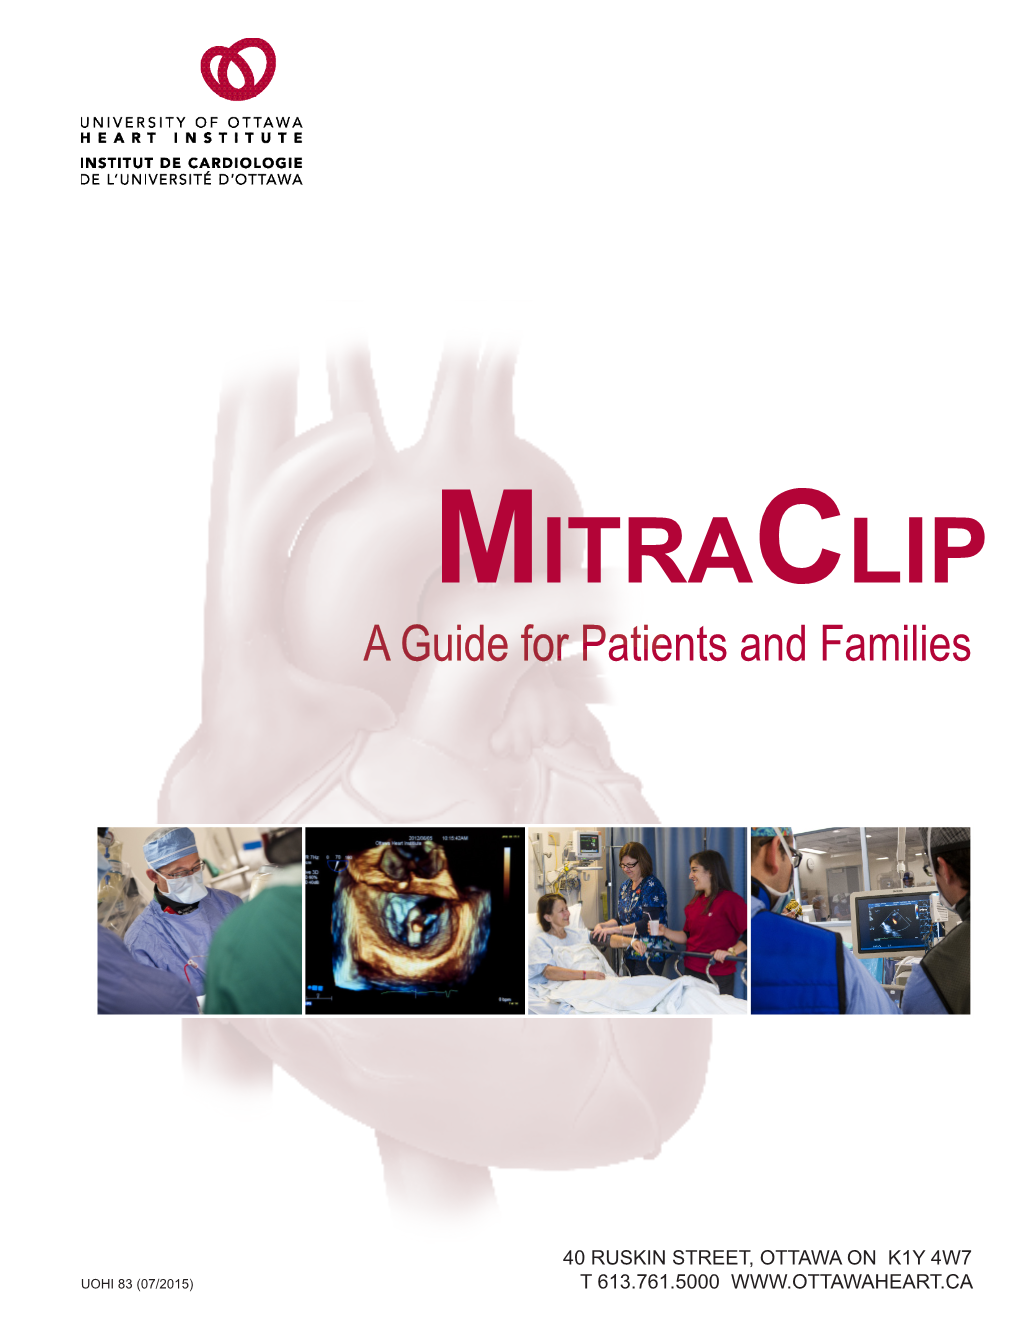 Mitraclip a Guide for Patients and Families